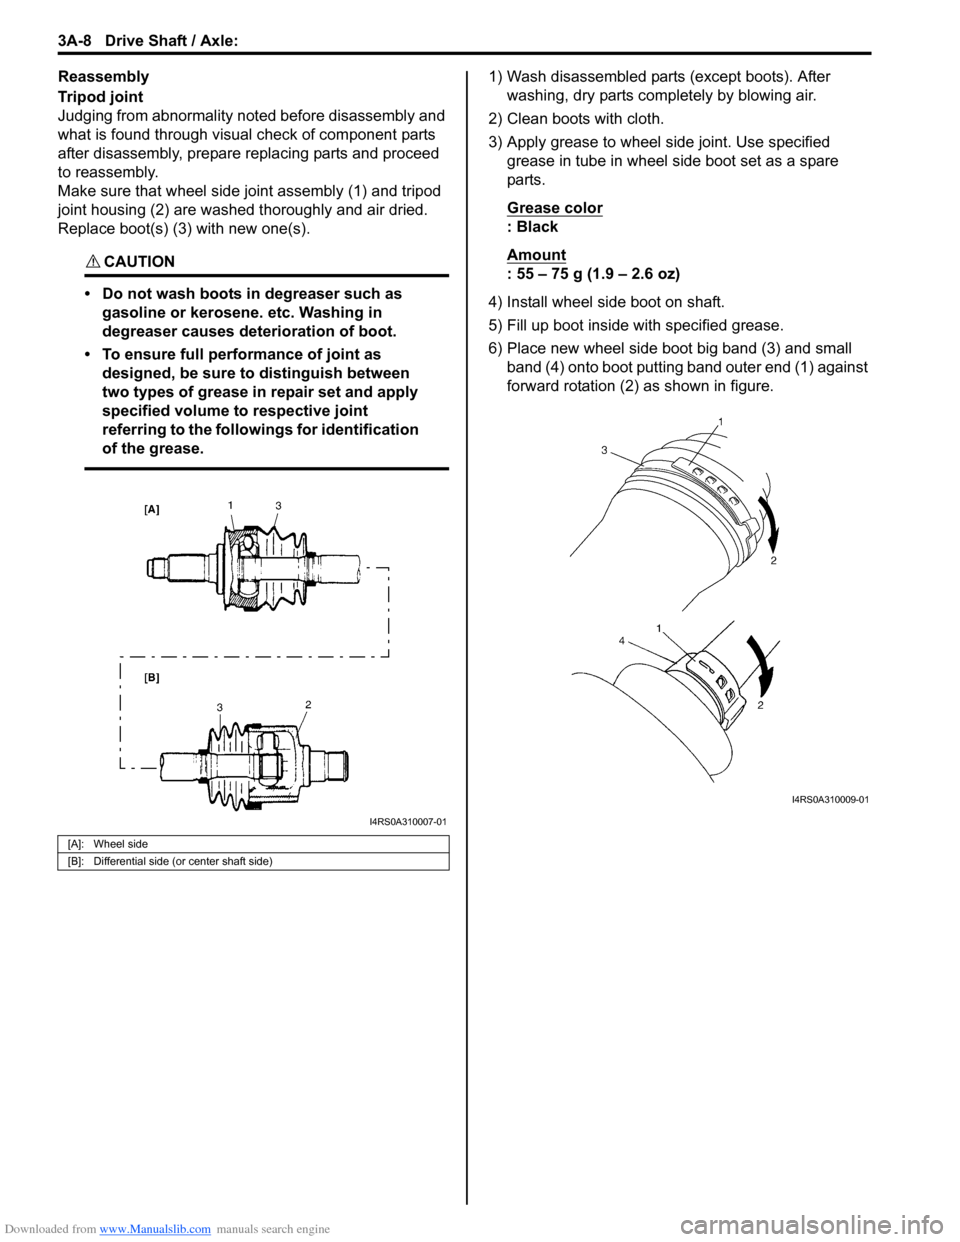 SUZUKI SWIFT 2005 2.G Service Workshop Manual Downloaded from www.Manualslib.com manuals search engine 3A-8 Drive Shaft / Axle: 
Reassembly
Tripod joint
Judging from abnormality noted before disassembly and 
what is found through visual check of 